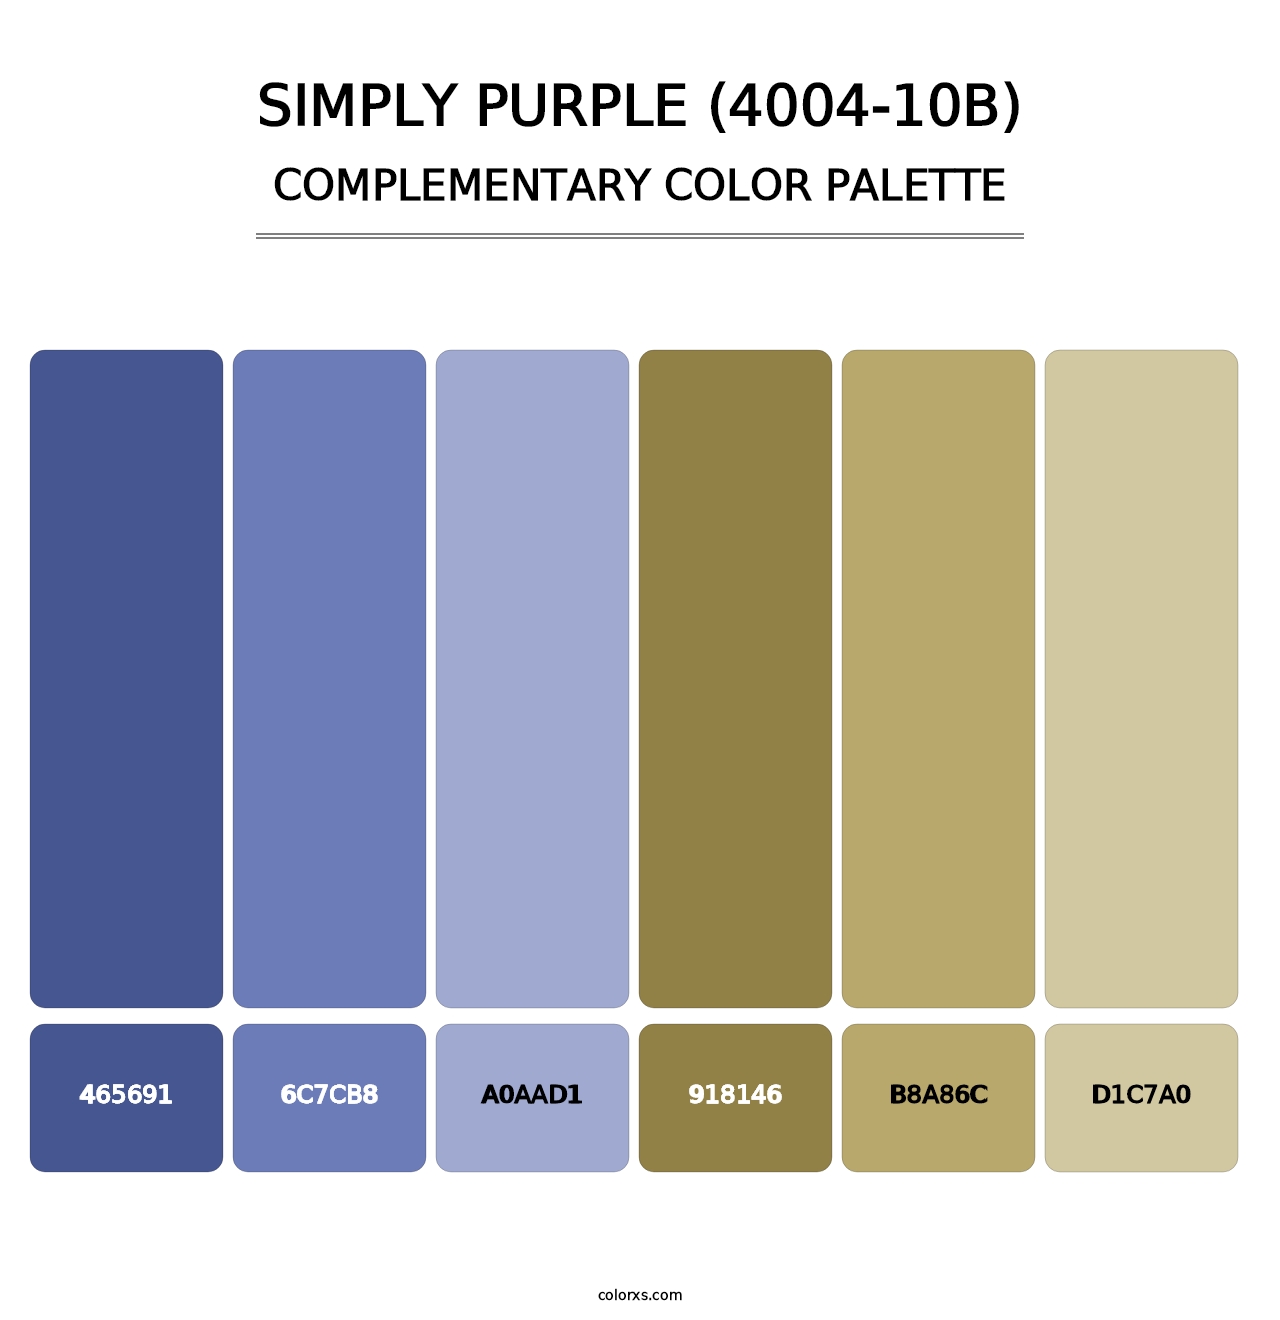 Simply Purple (4004-10B) - Complementary Color Palette